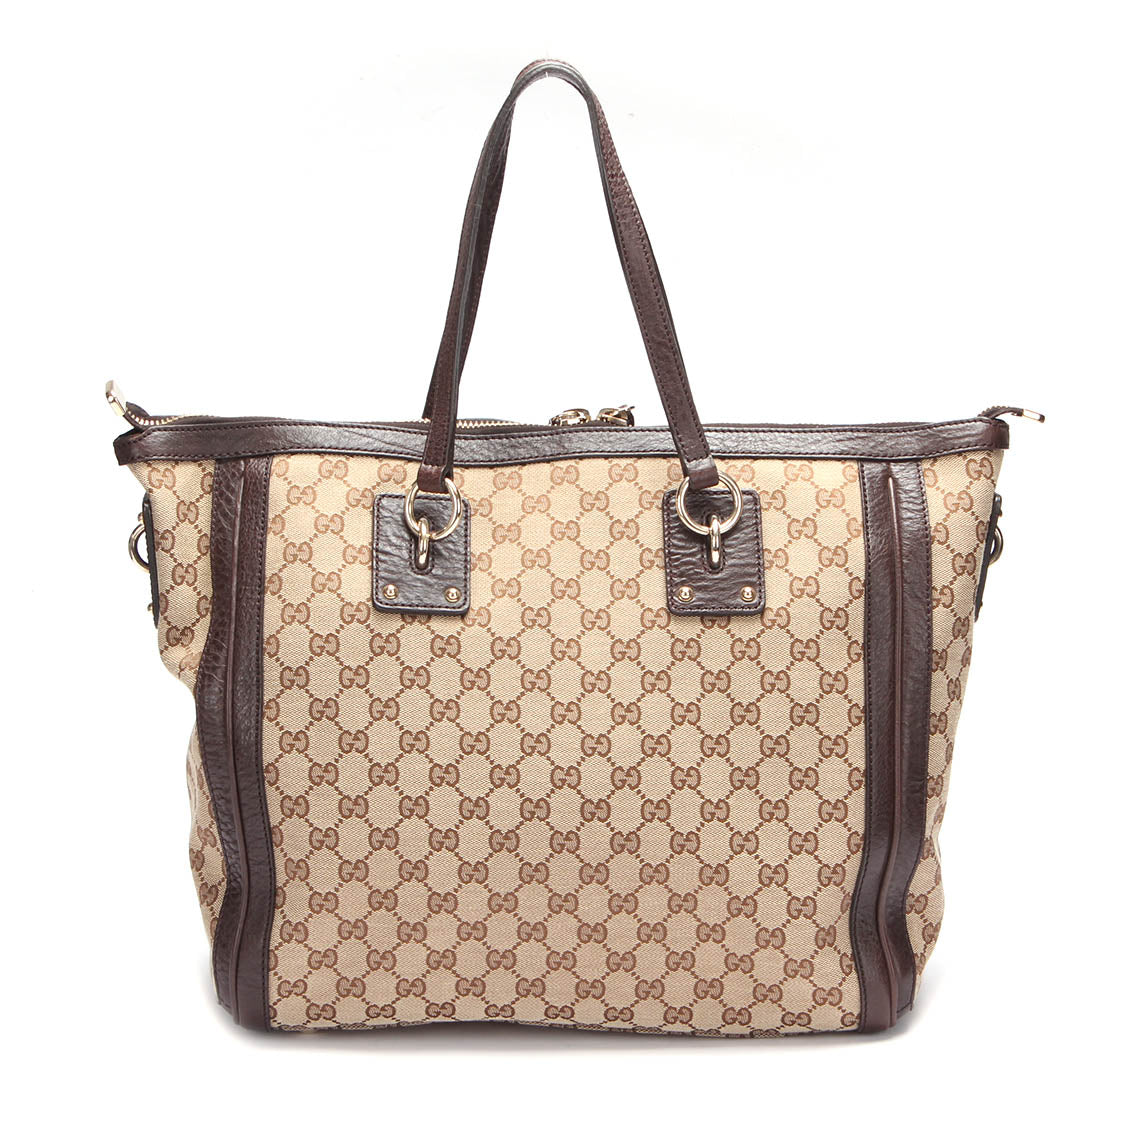 Women, Gucci bag, hasnt been authenticated, re